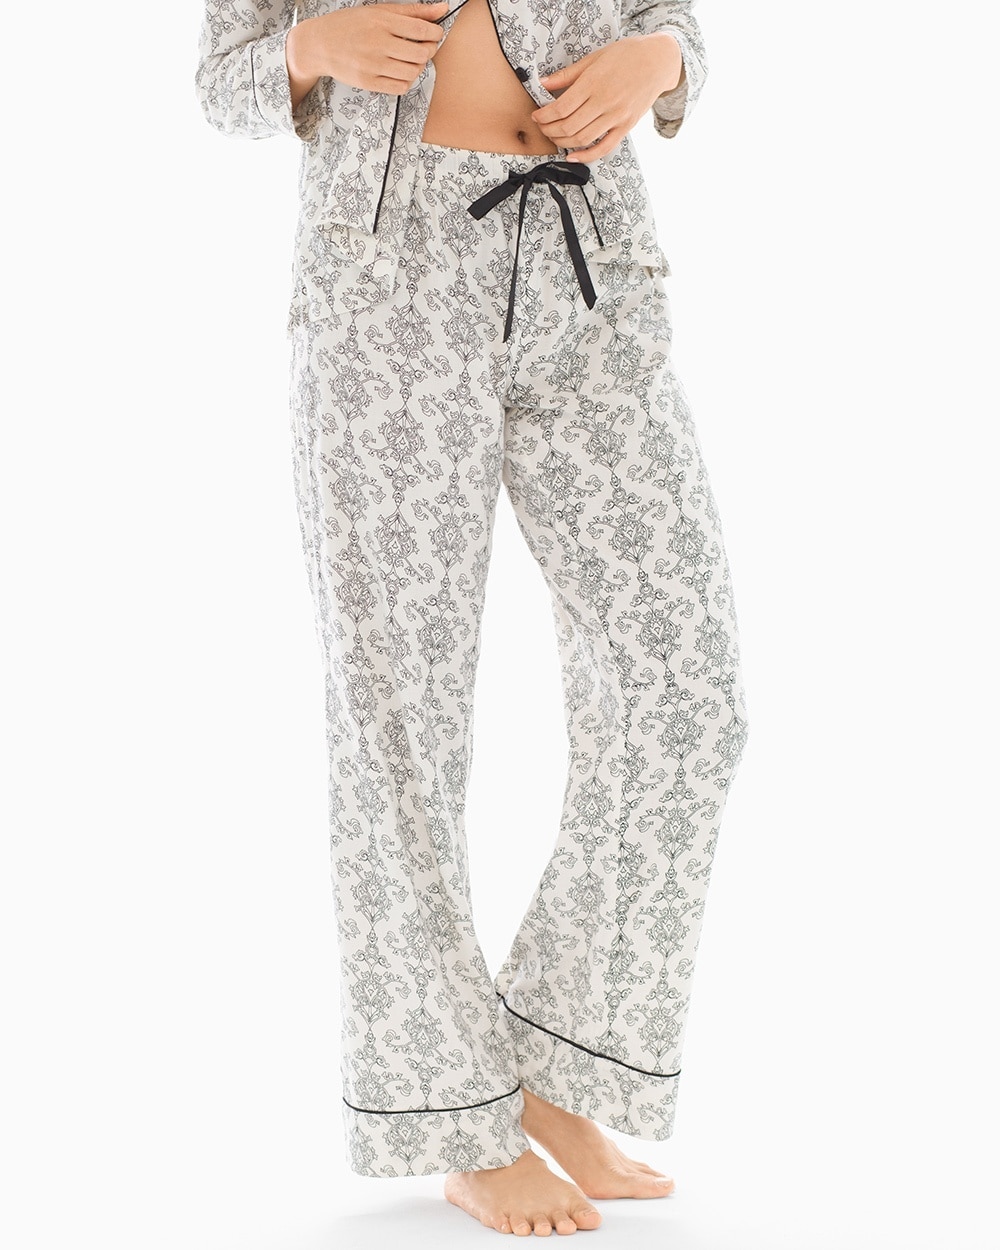 Cozy Woven Cotton Blend Pajama Pants Chic Scroll Ivory